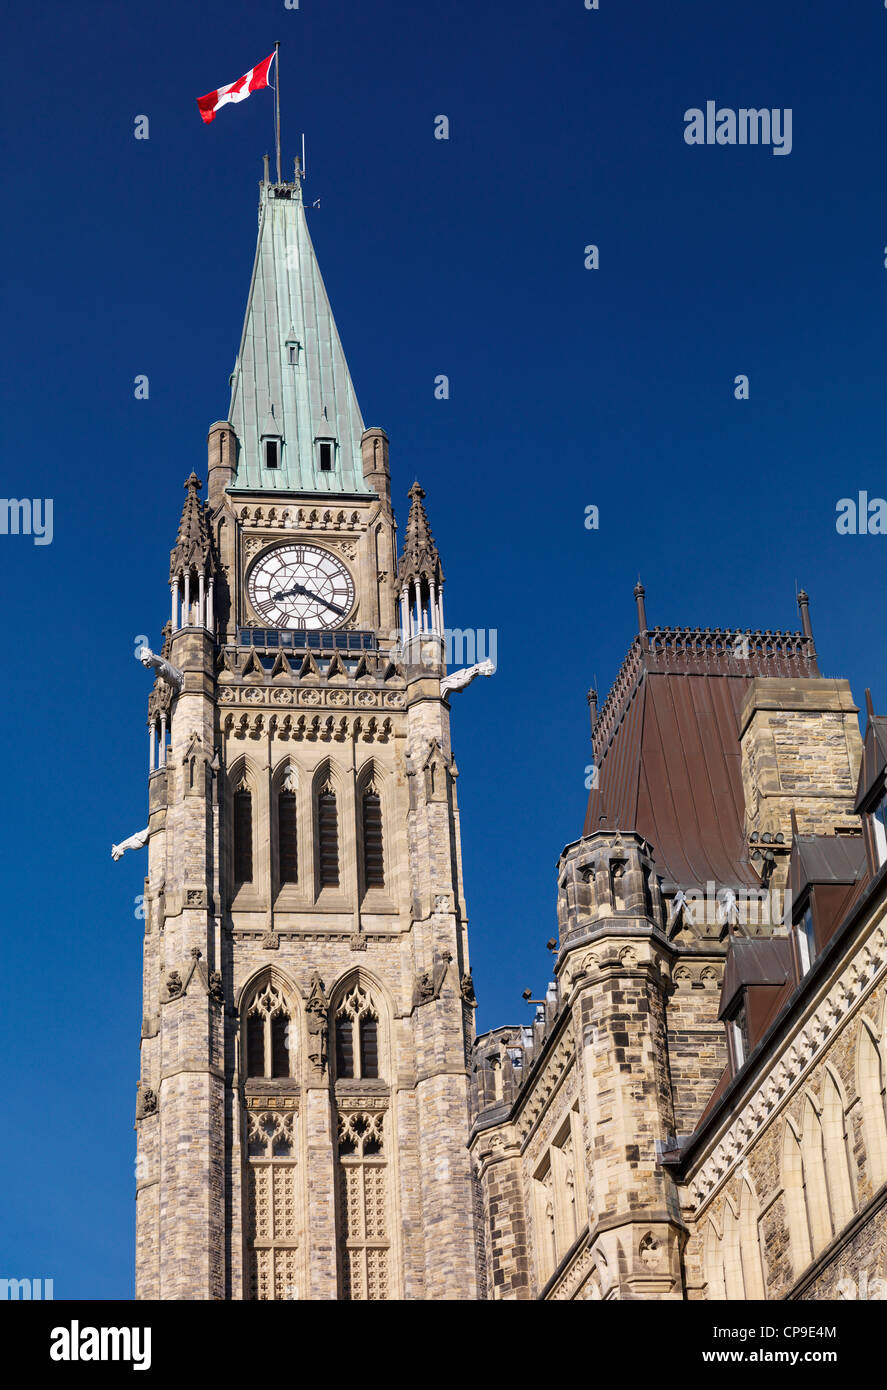 The Peace Tower of the Parliament Building. Ottawa, Ontario, Canada. Stock Photo